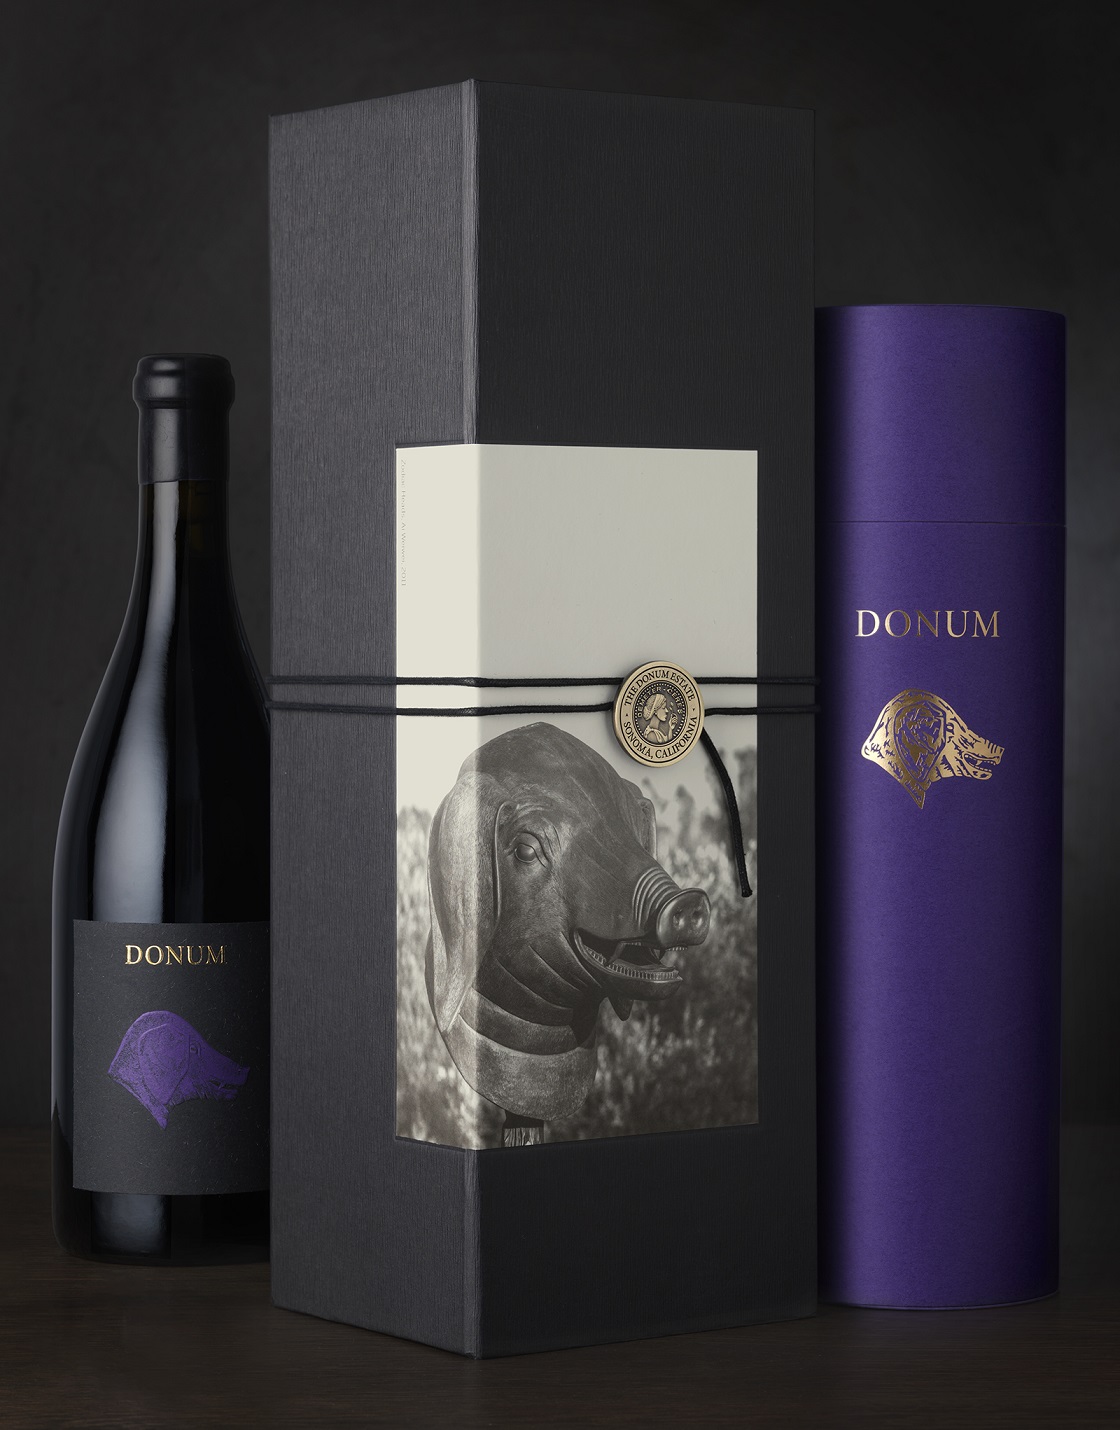 CF Napa Crafts Luxury Unboxing Experience for The Donum Estate